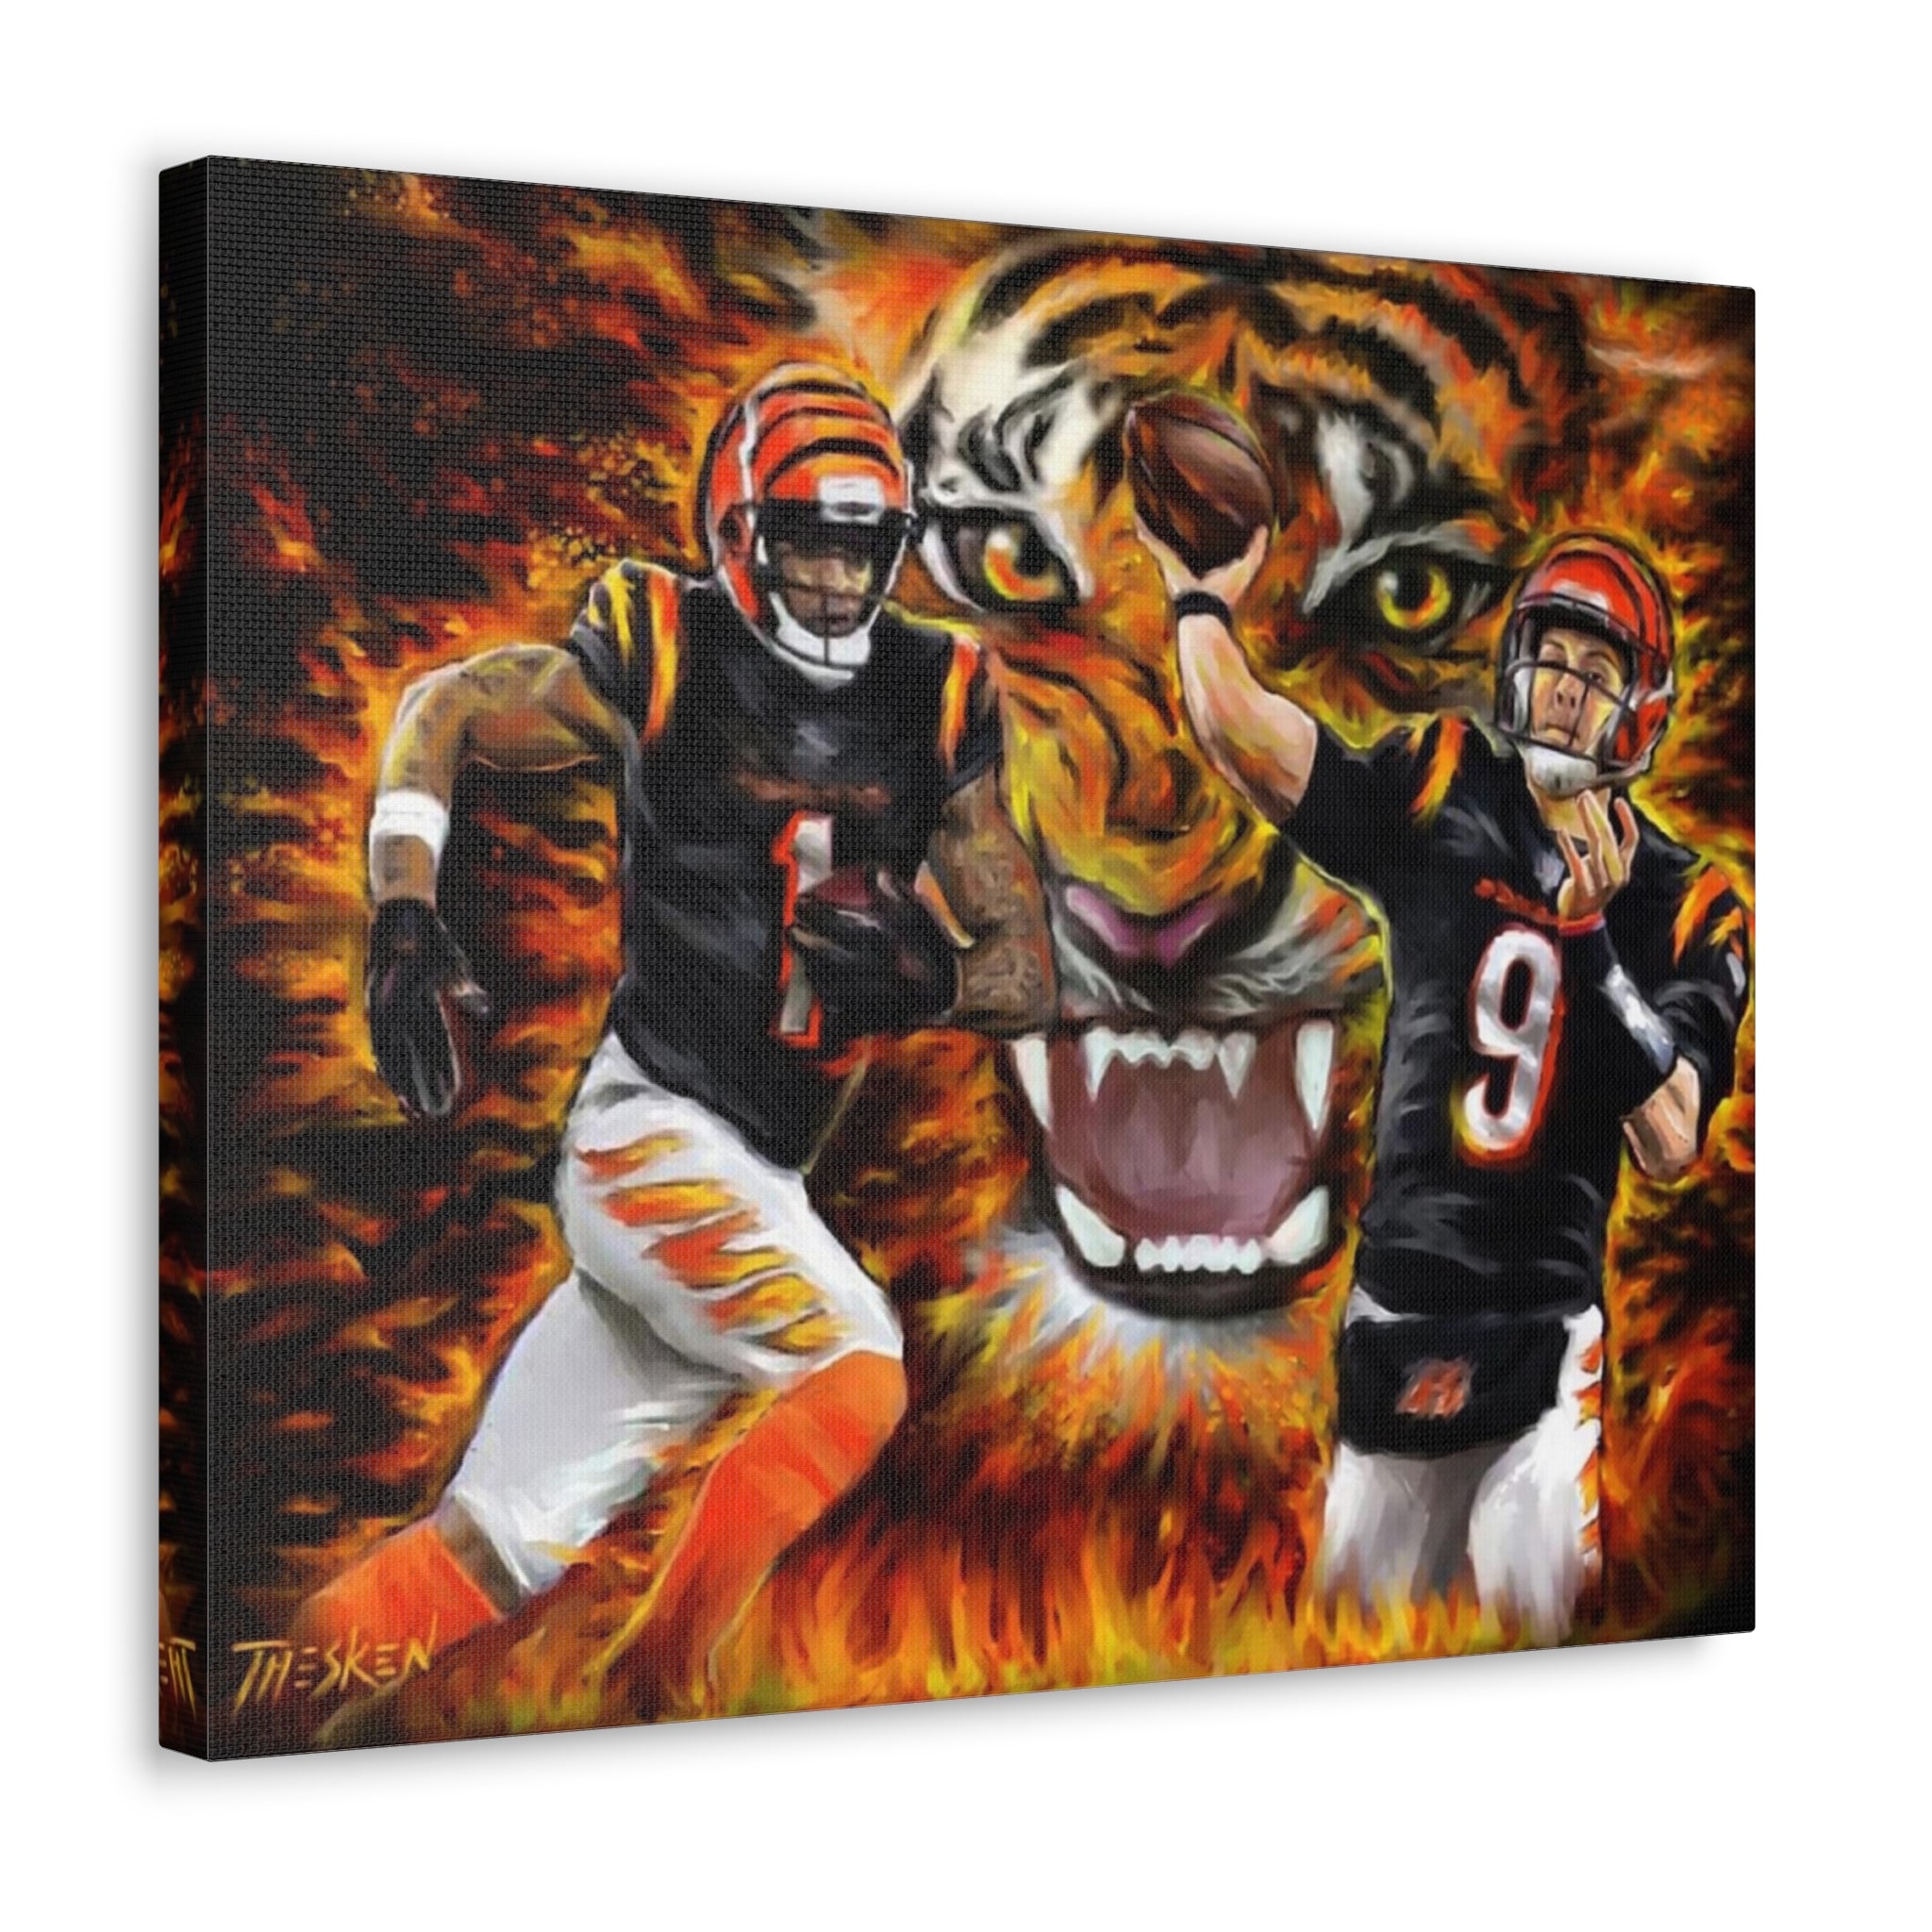 BENGALS FIRE ON CANVAS